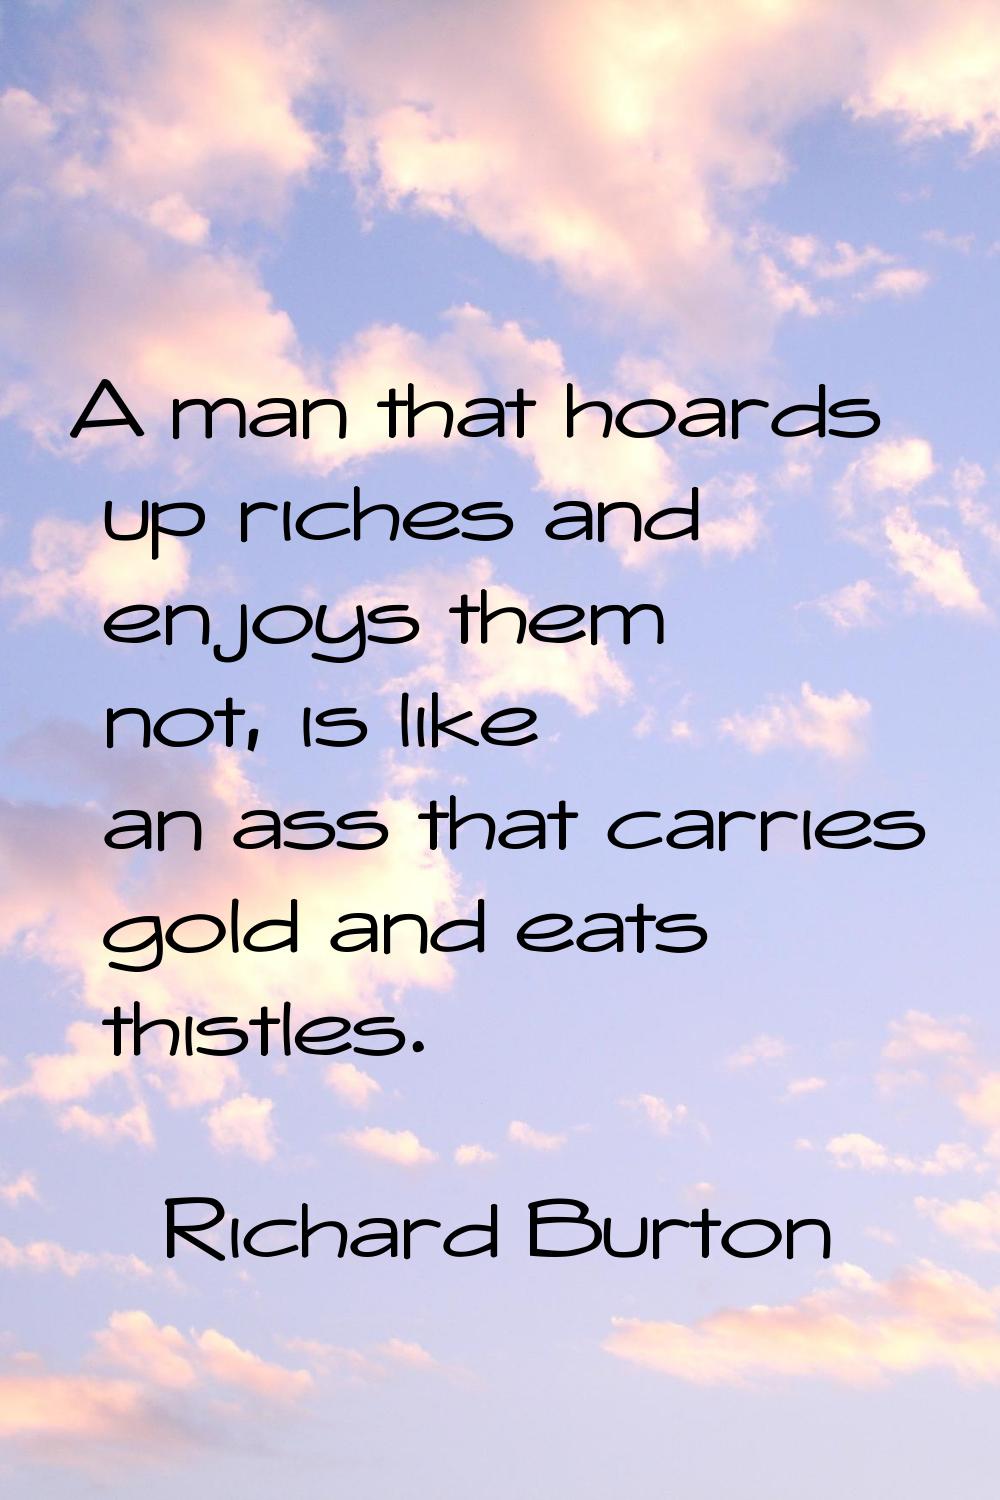 A man that hoards up riches and enjoys them not, is like an ass that carries gold and eats thistles